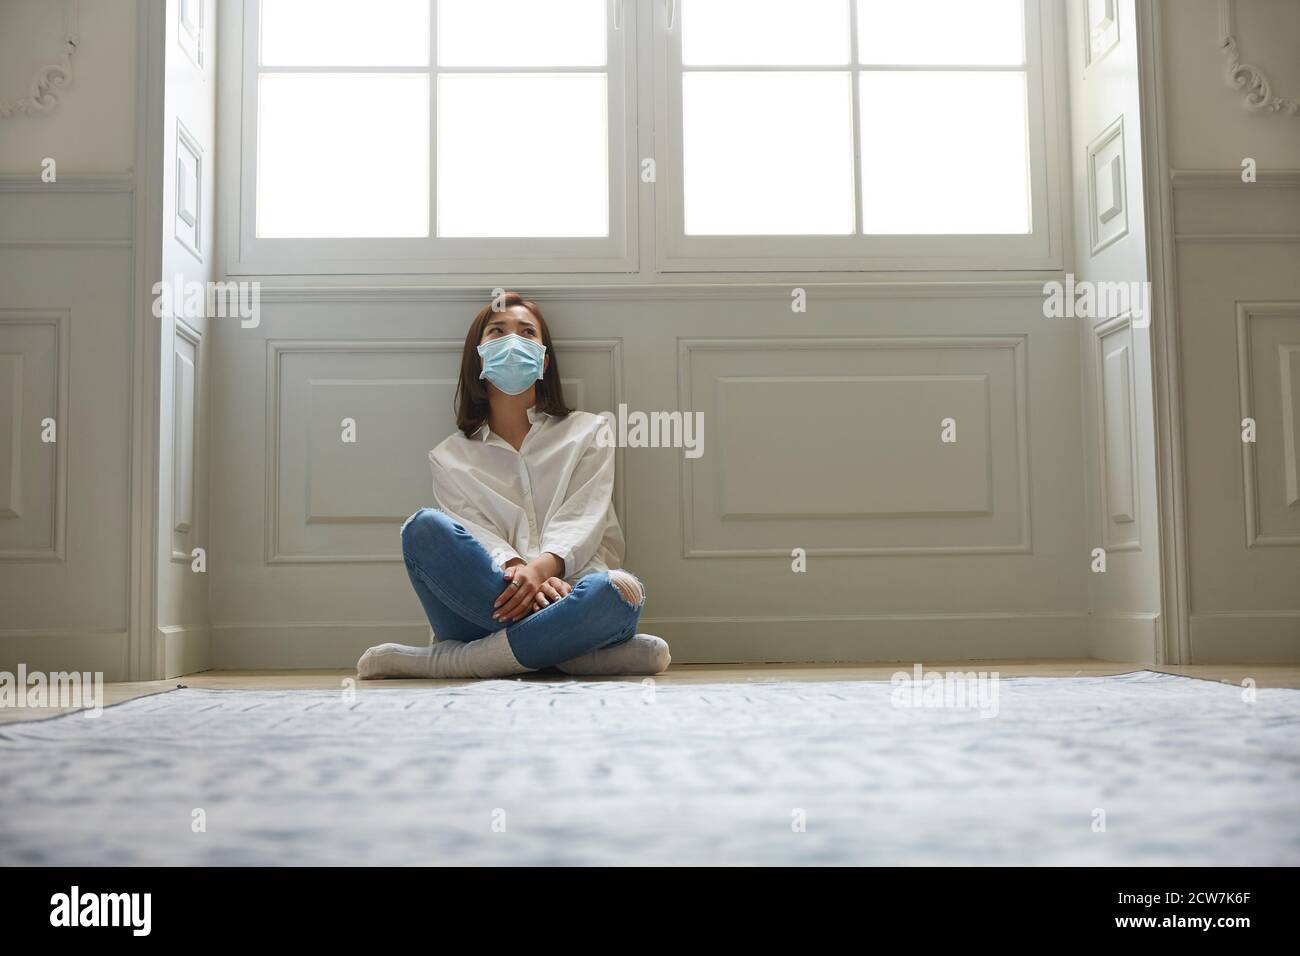 young asian woman in quarantine at home sitting on floor legs crosedd wearing facial mask Stock Photo